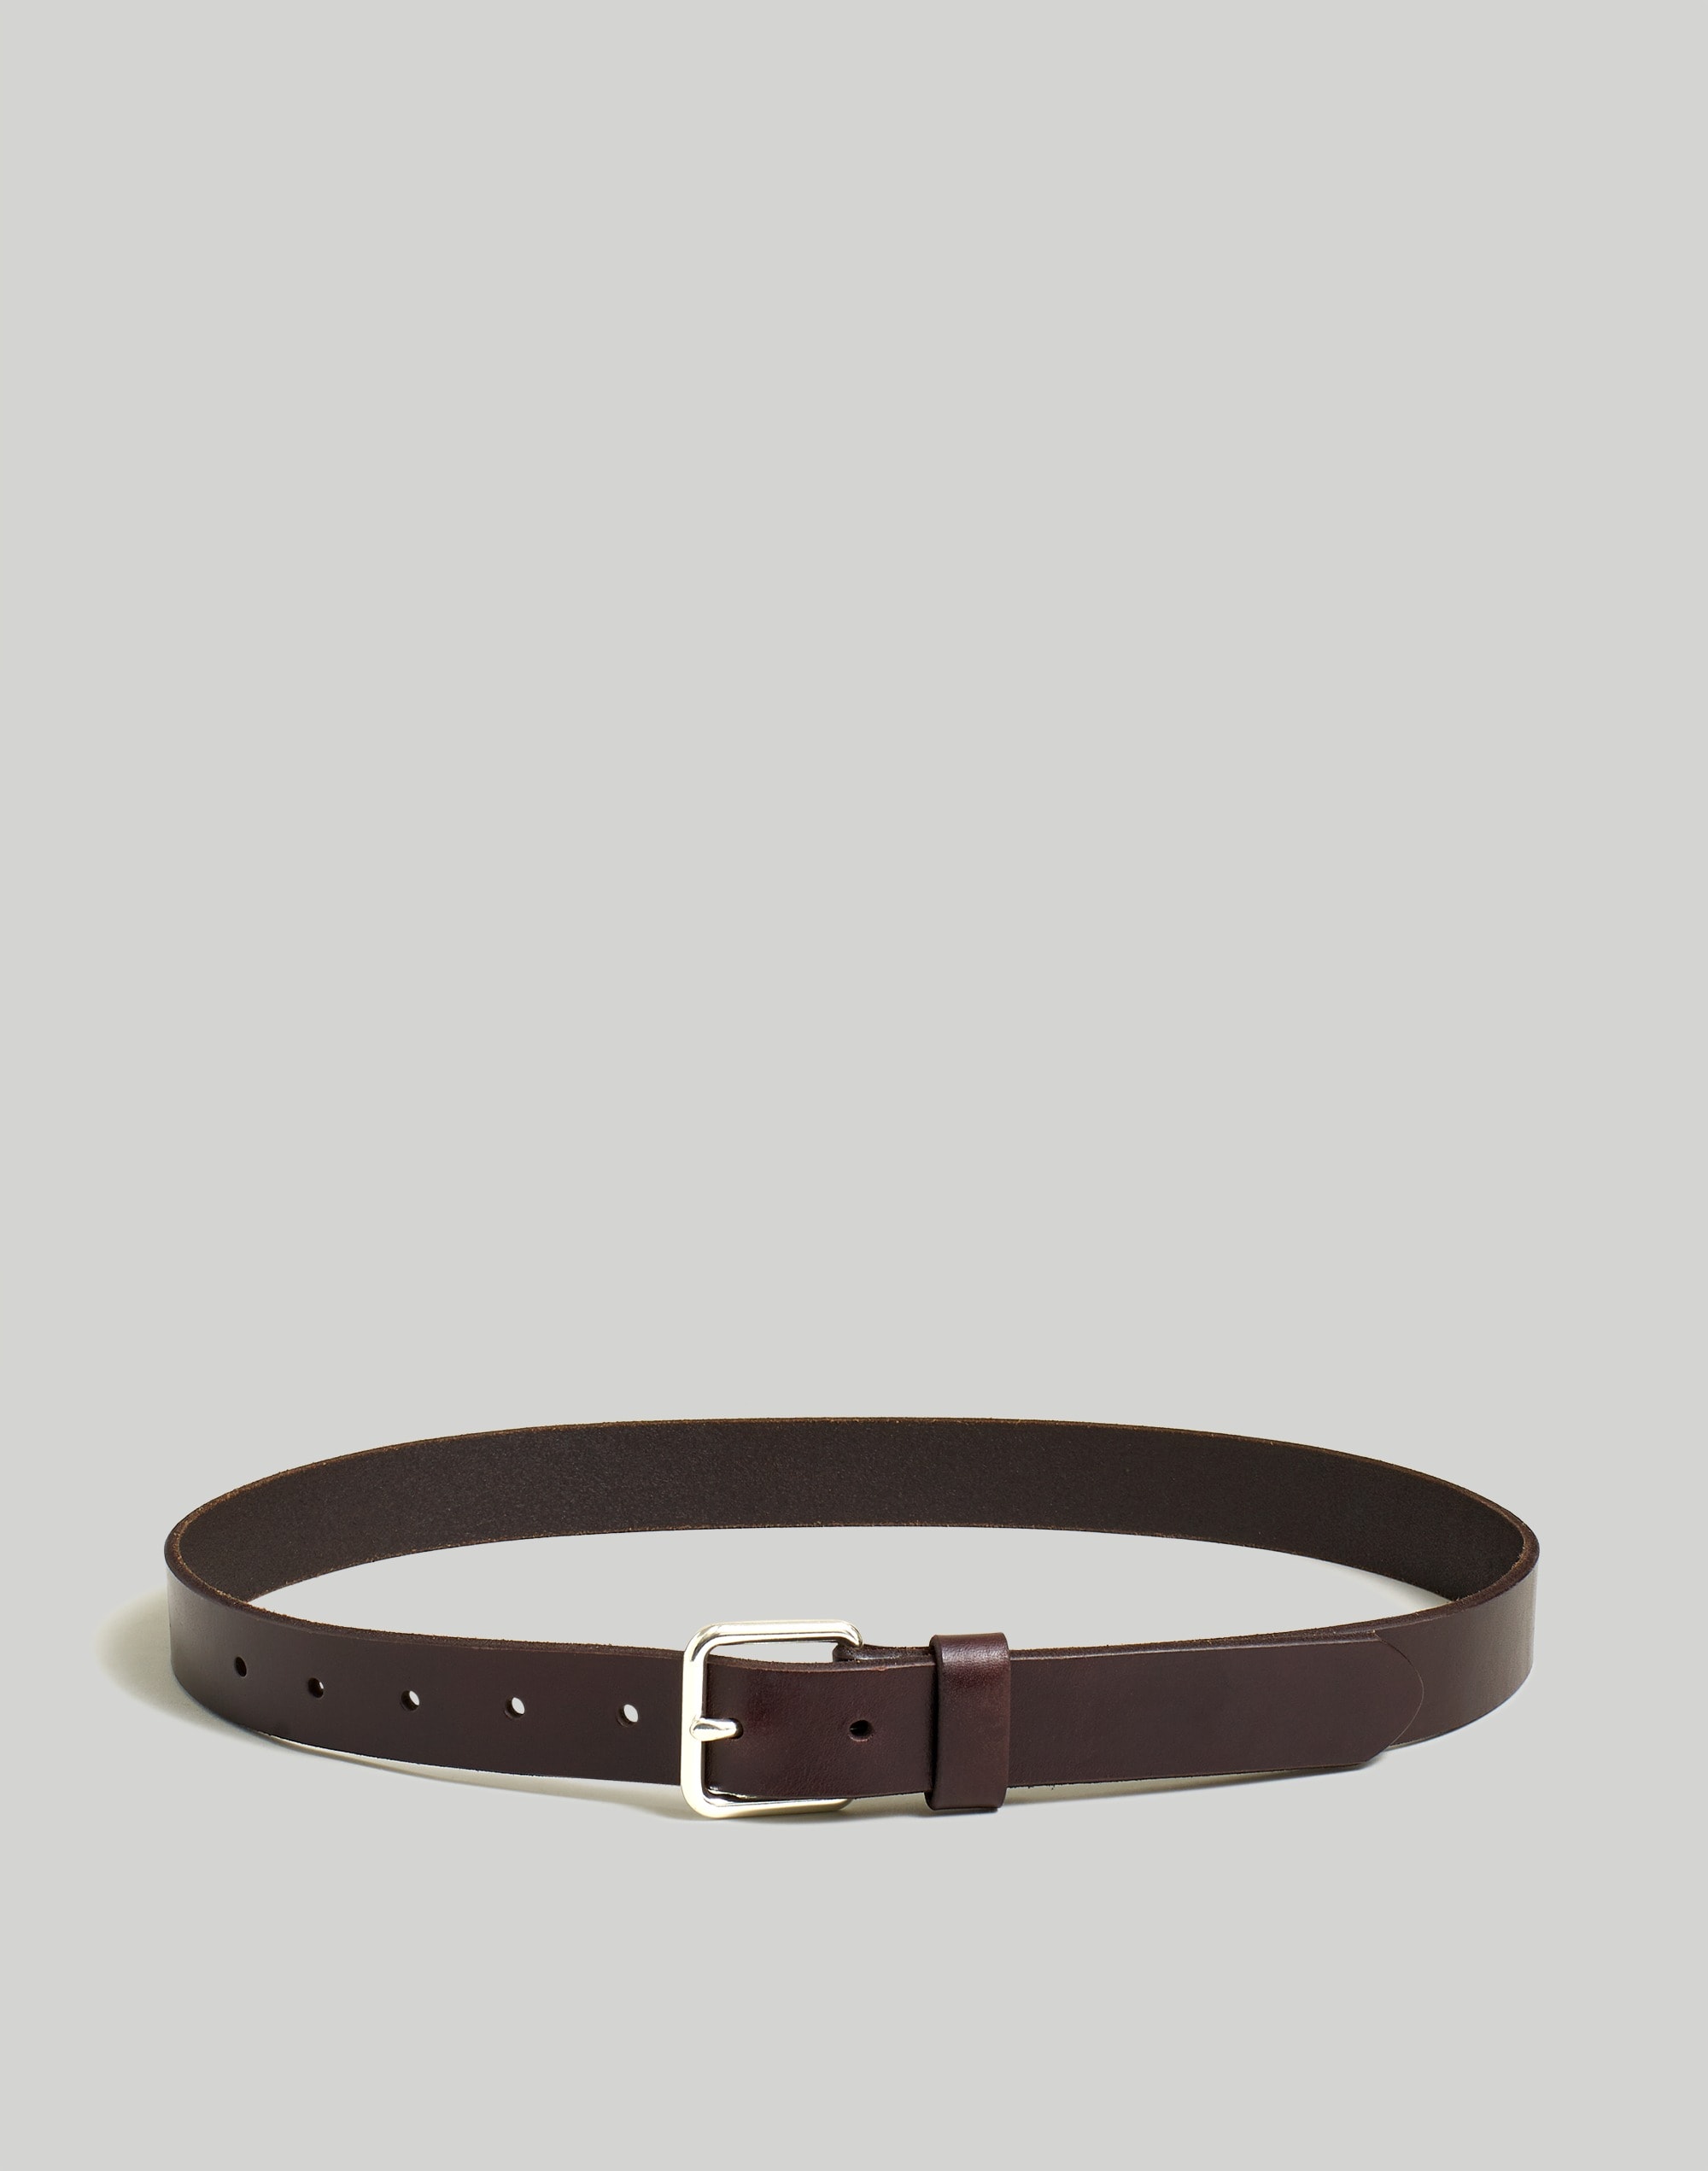 Mw Narrow Leather Belt In Rich Brown